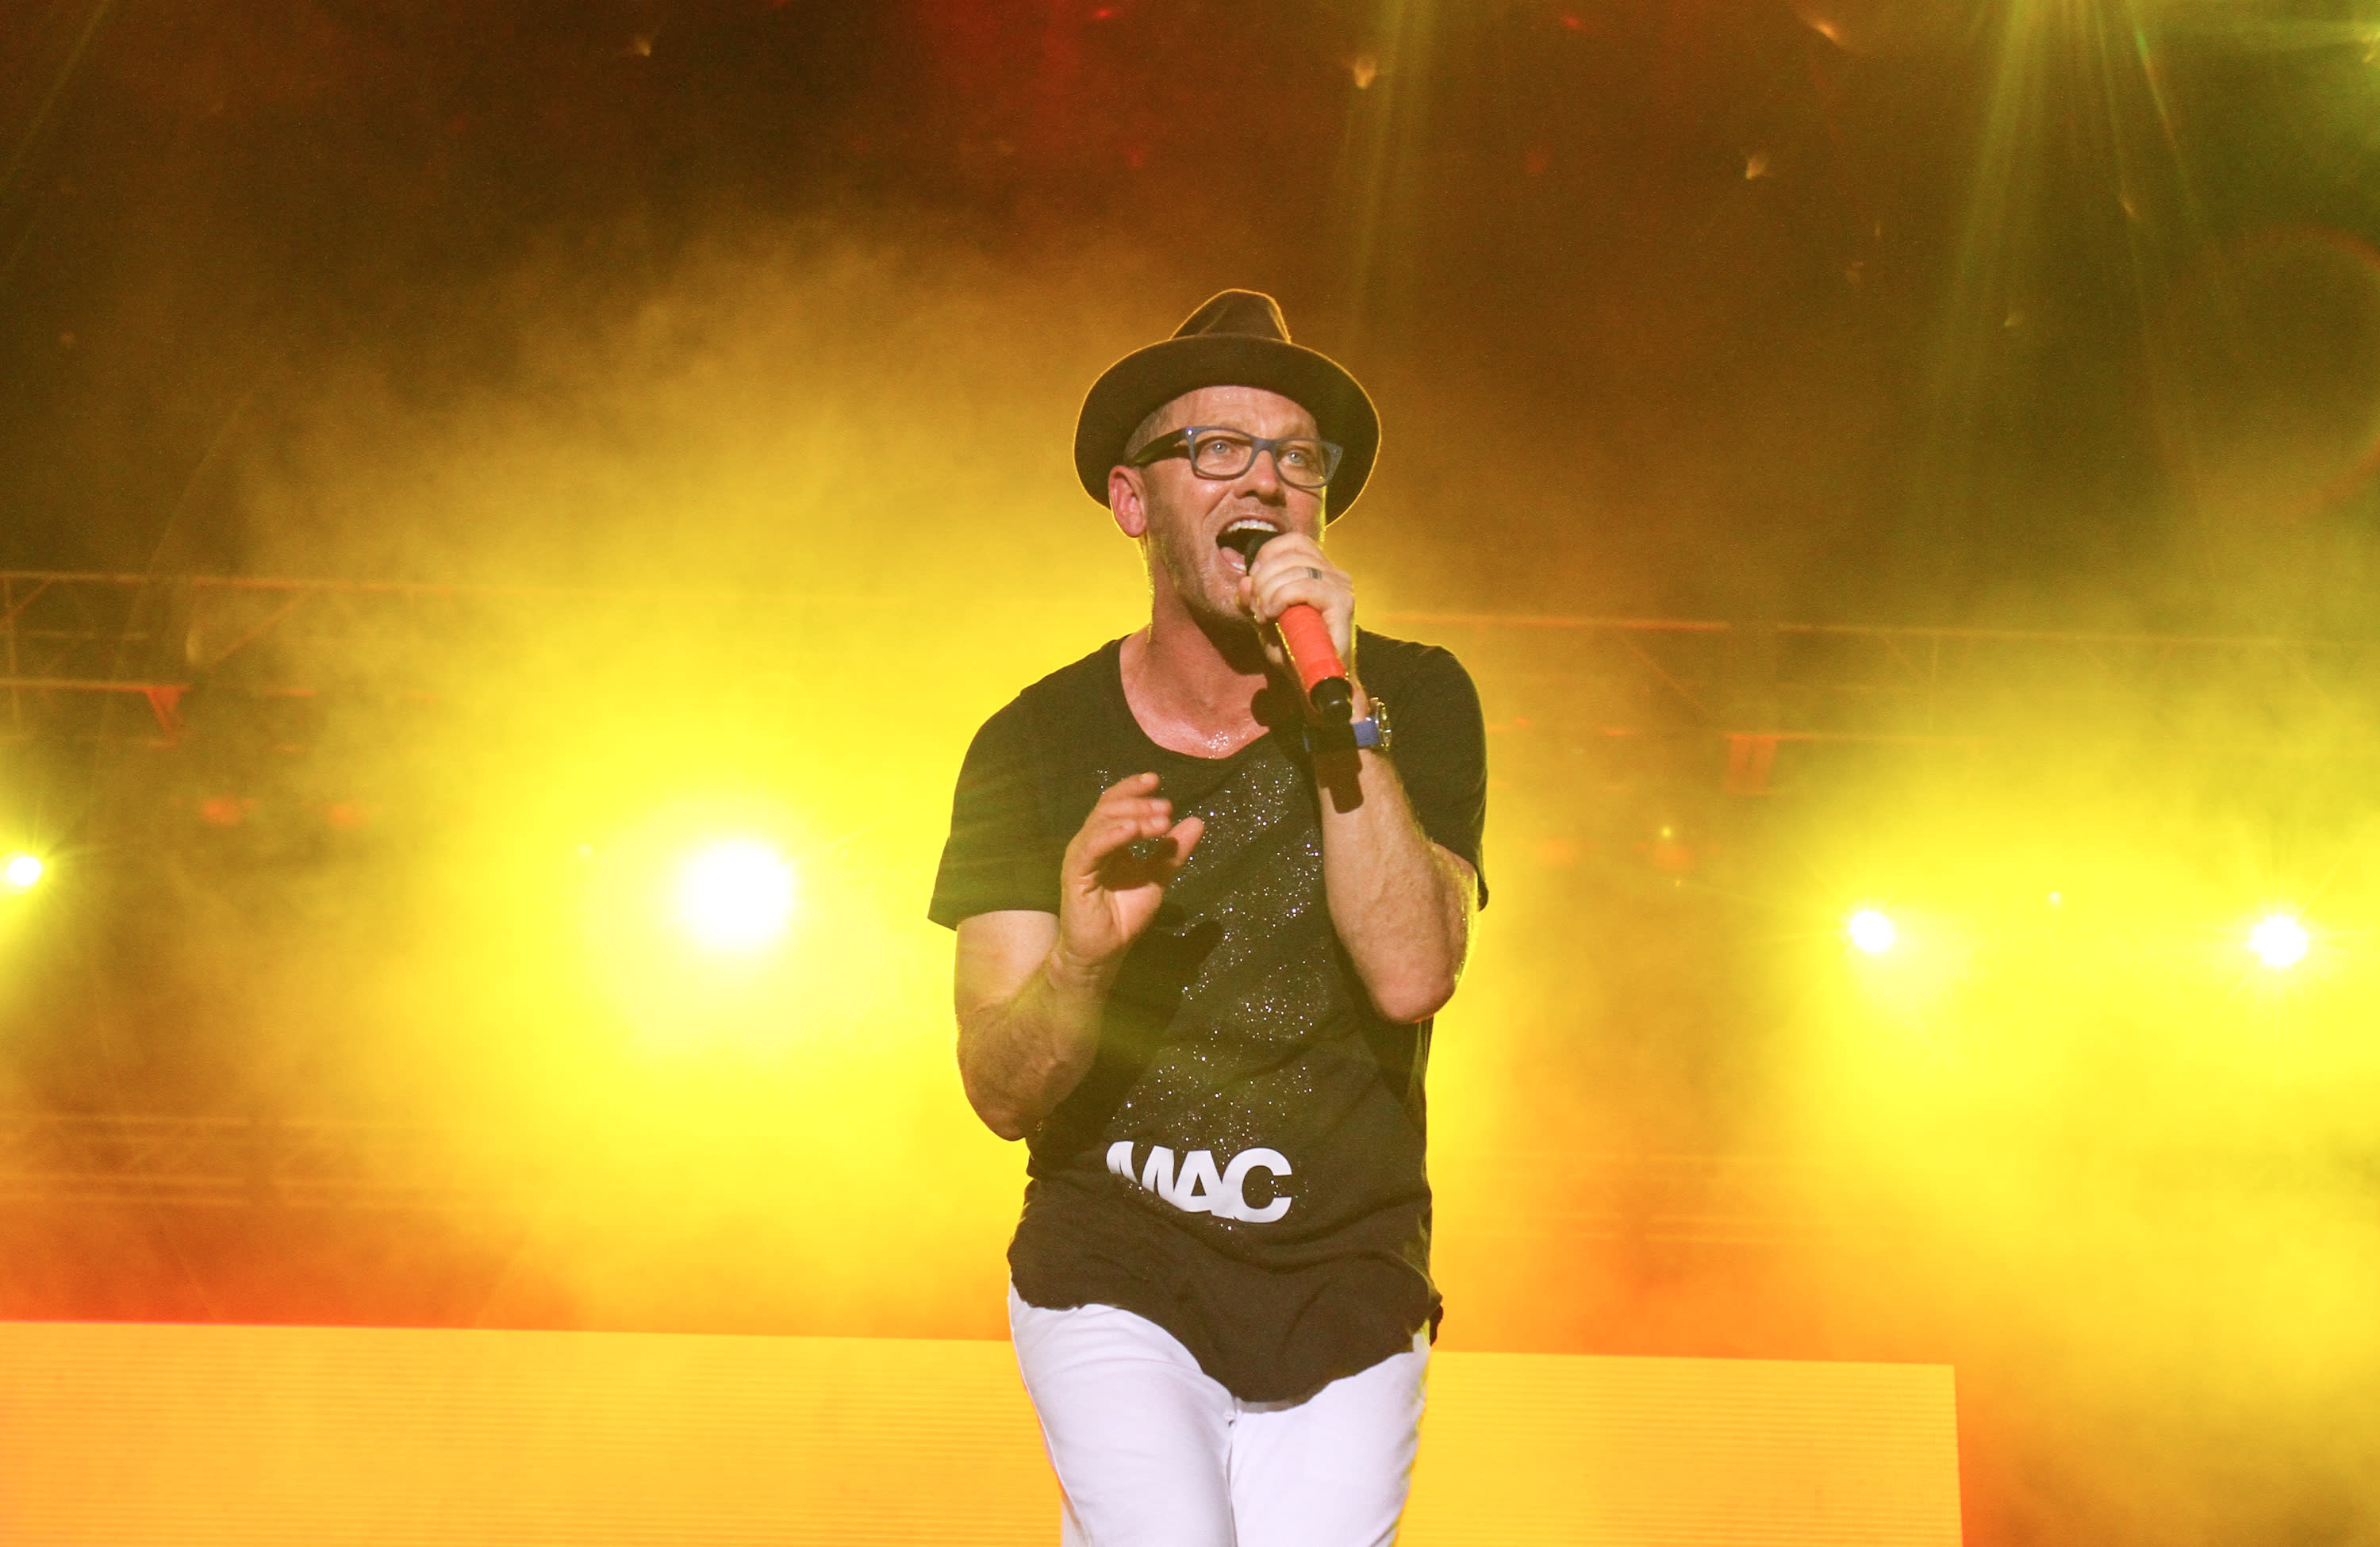 Christian rapper TobyMac pays tribute to late son in emotional